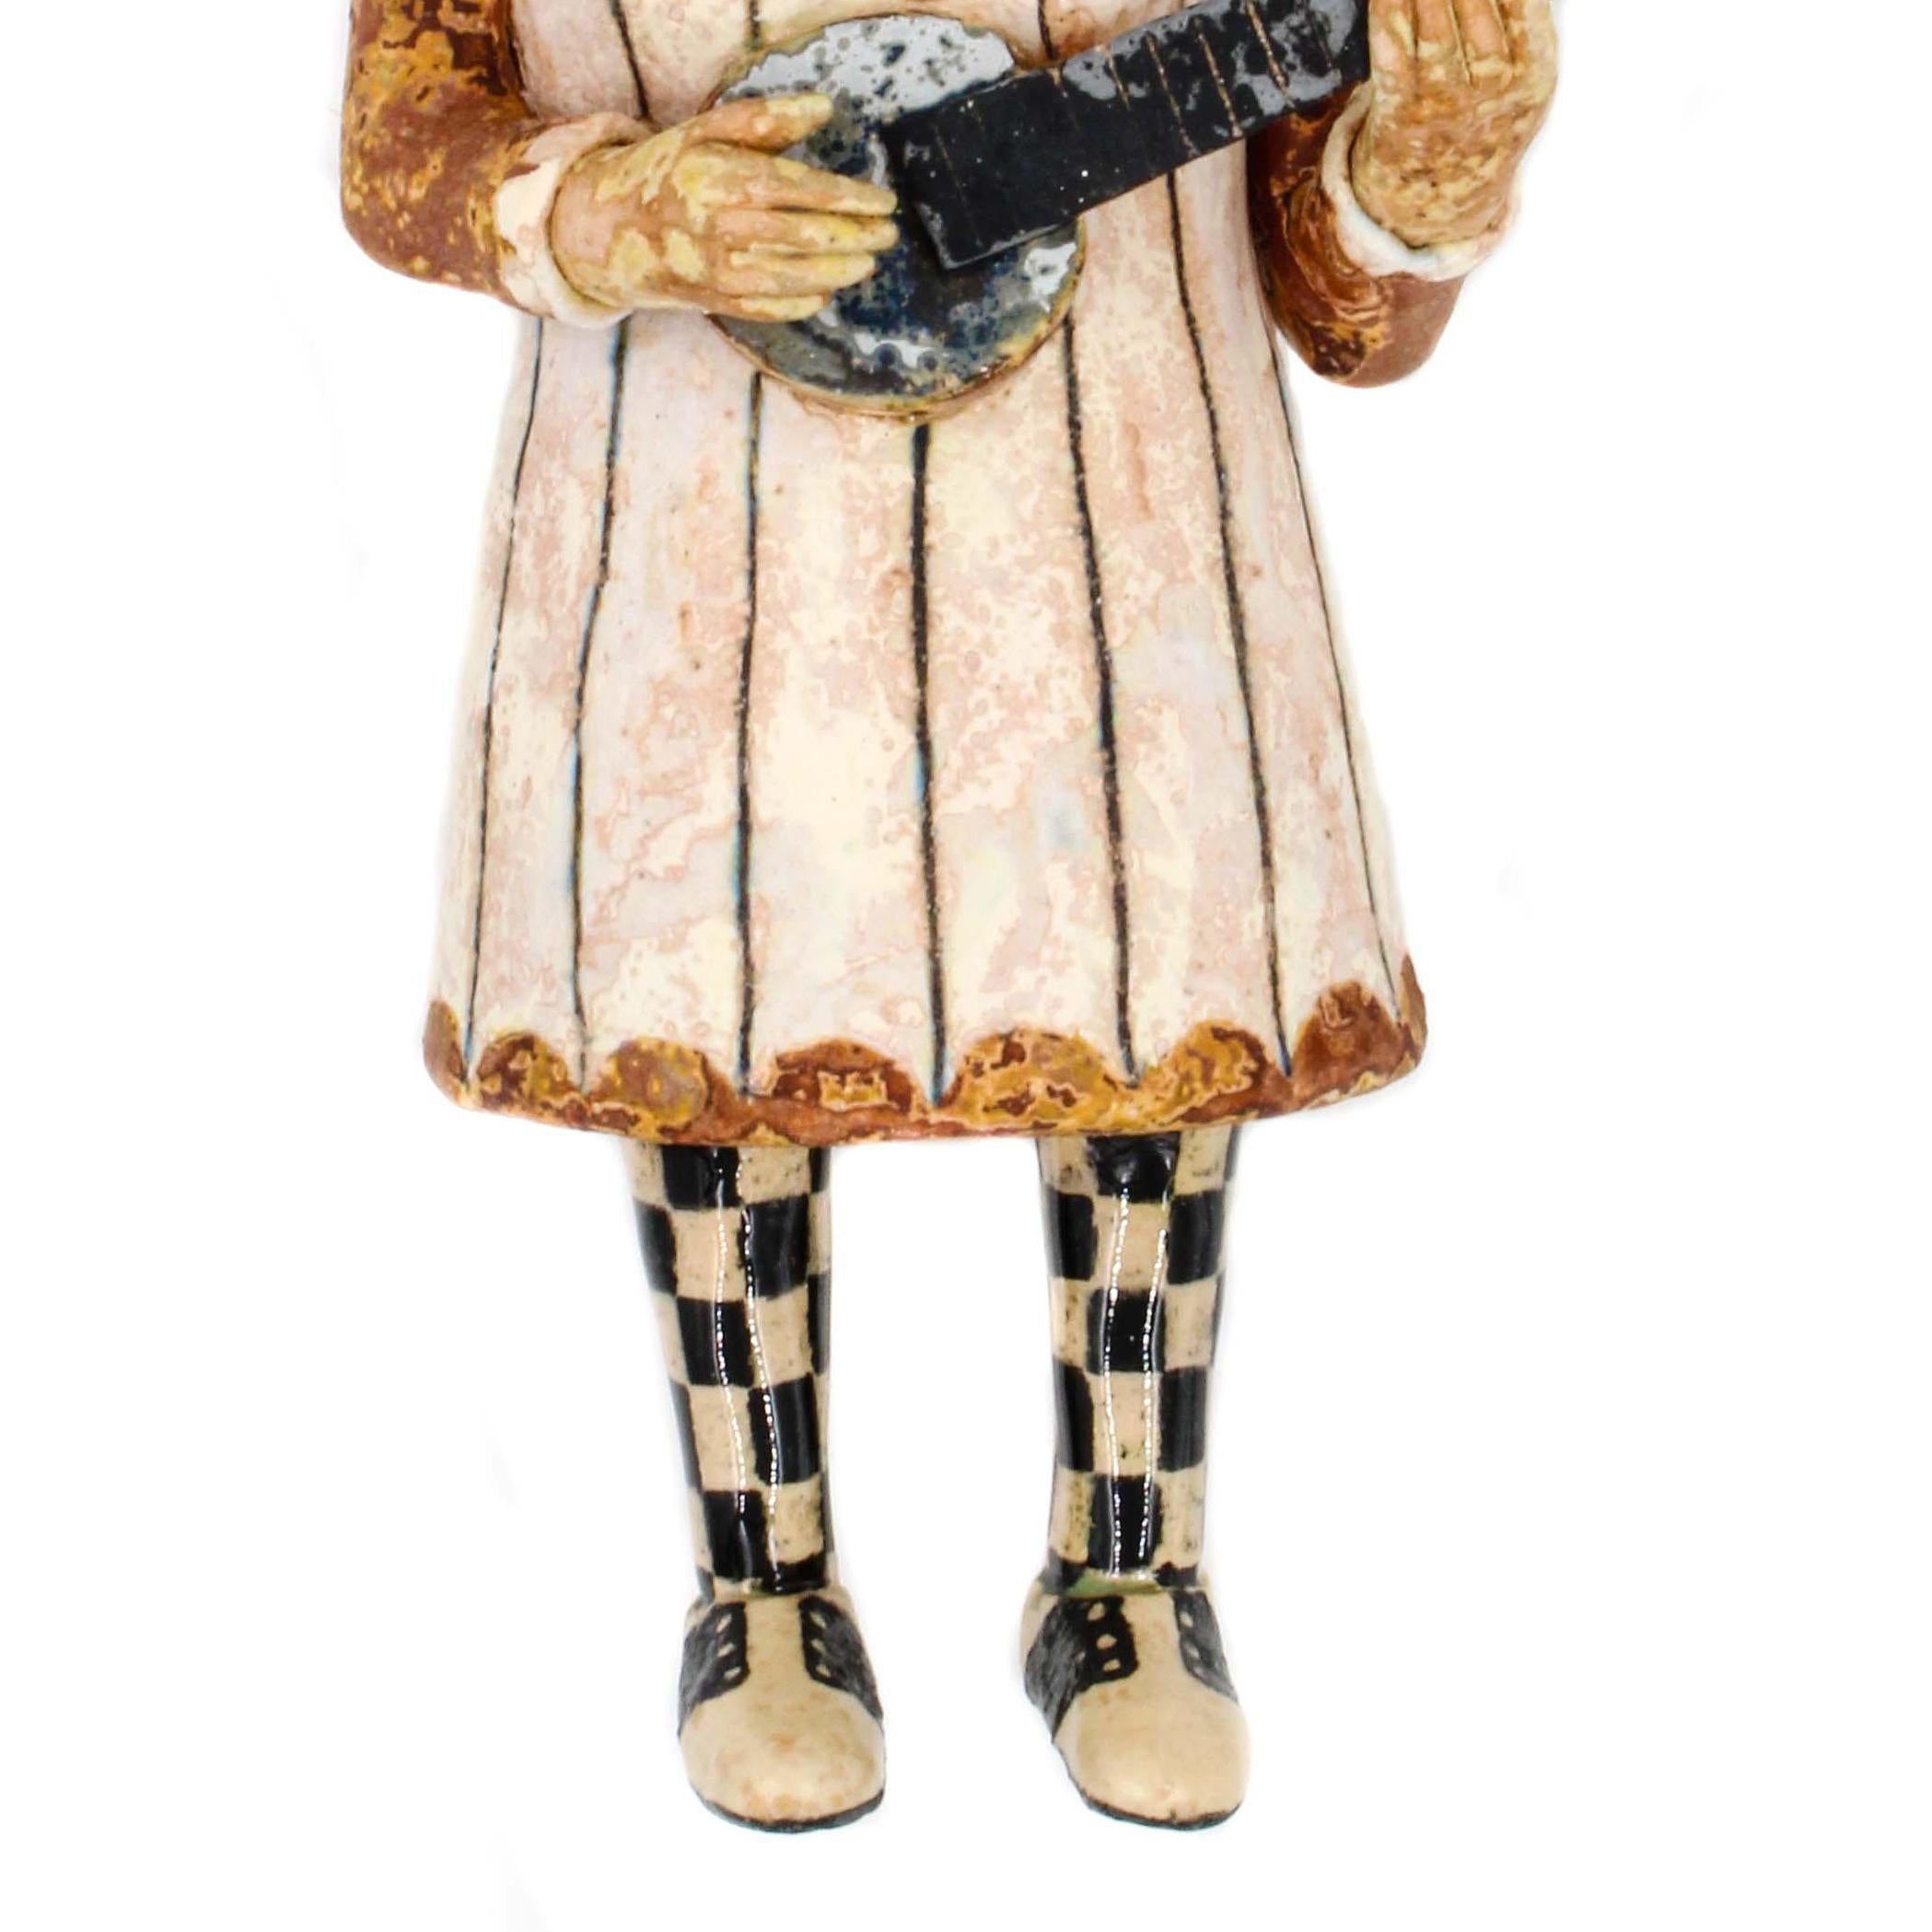 Banjo Lady is a 2018 ceramic earthenware scultpure by Wesley Anderegg. Banjo Lady is stamped by the artist with their initials.